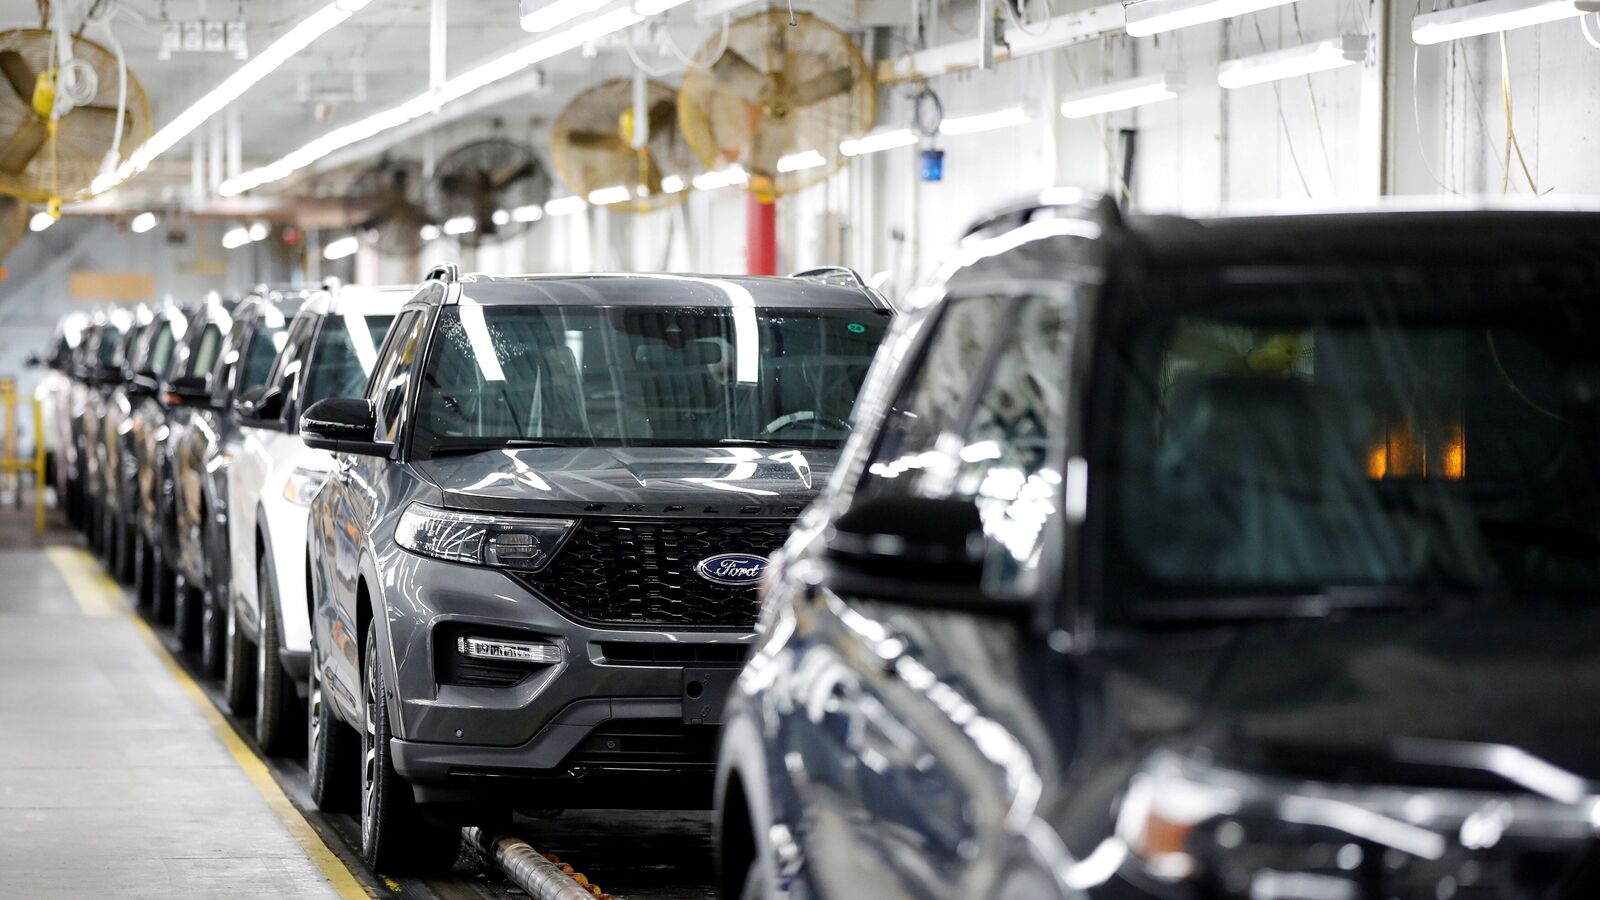 Ford Explorer SUVs recalled as they will roll away whereas being parked